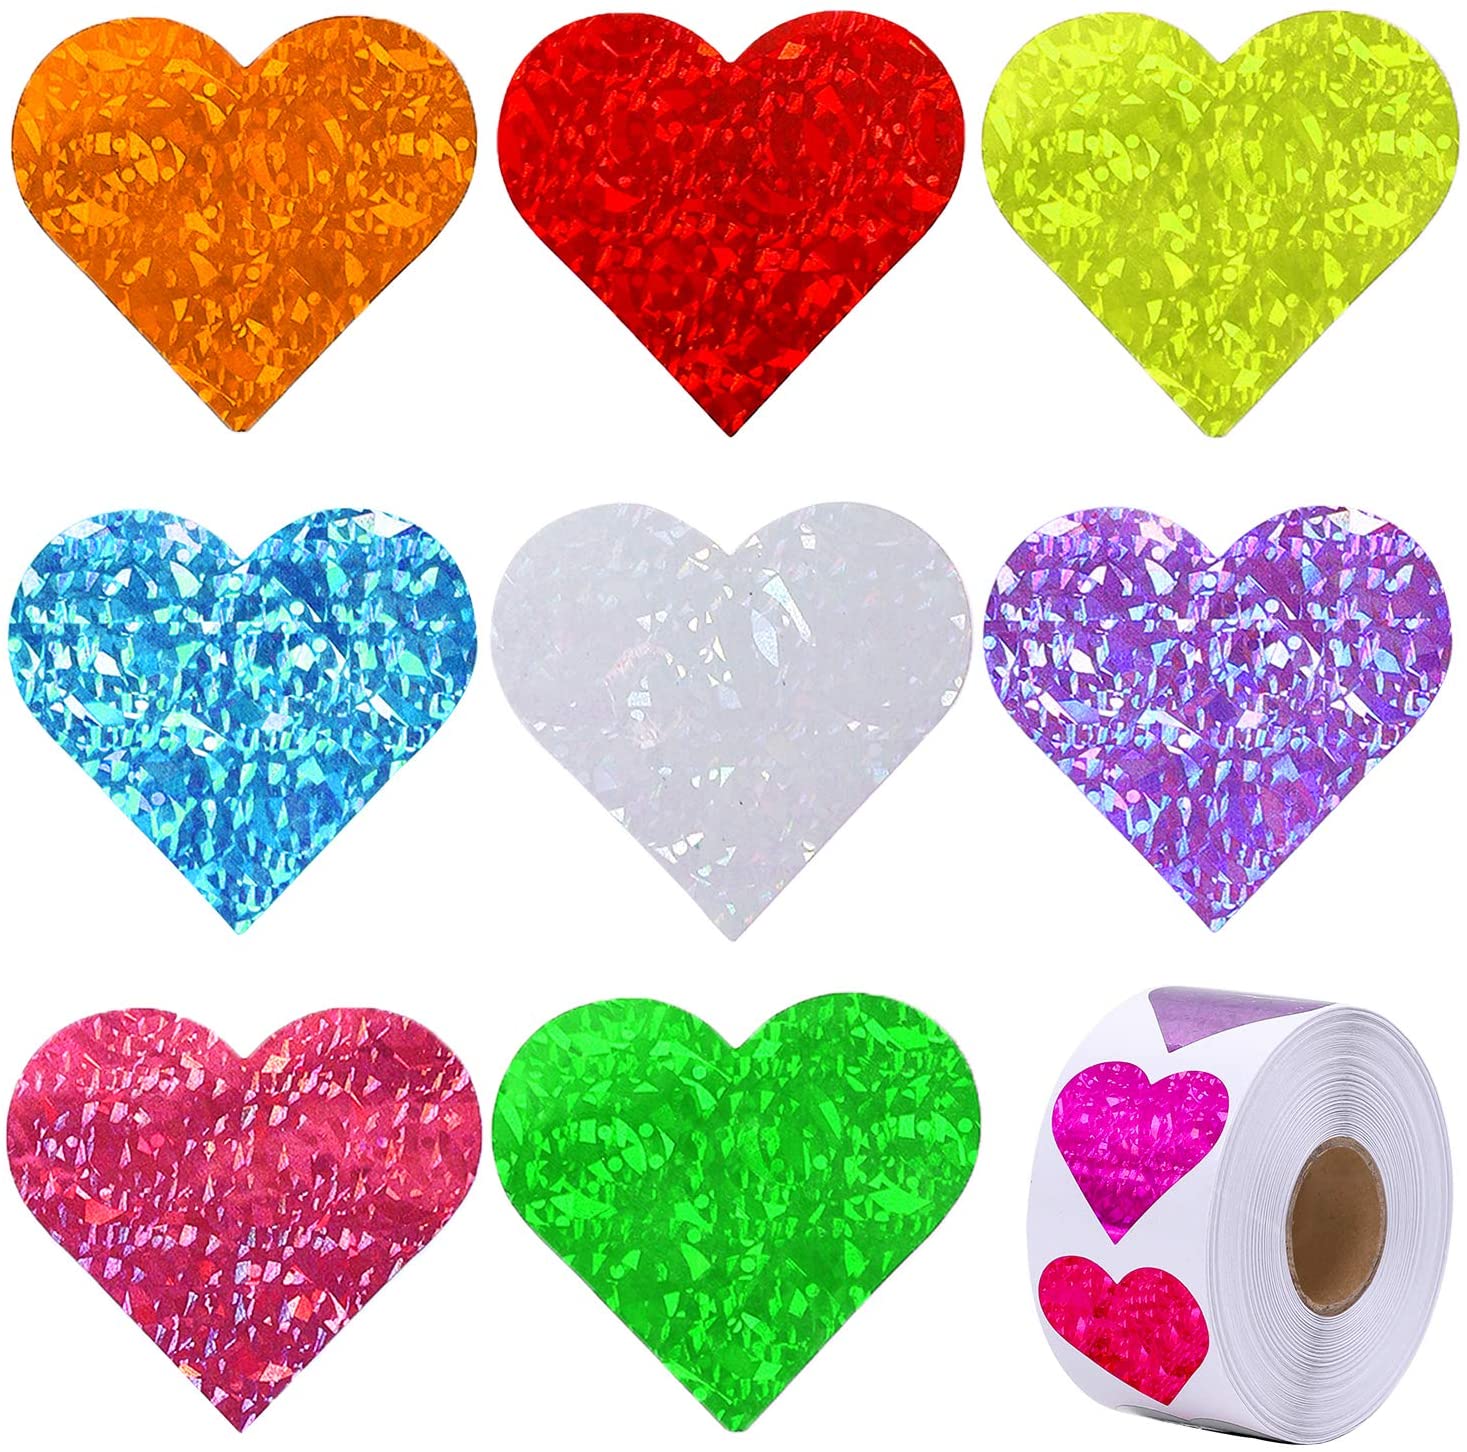 Ruisita 500 Pieces Glitter Foam Heart Stickers Self Adhesive Heart Decals 5 Colors 25 Pieces Large Foam Heart Shaped for Valentines Day Wedding Decoration 